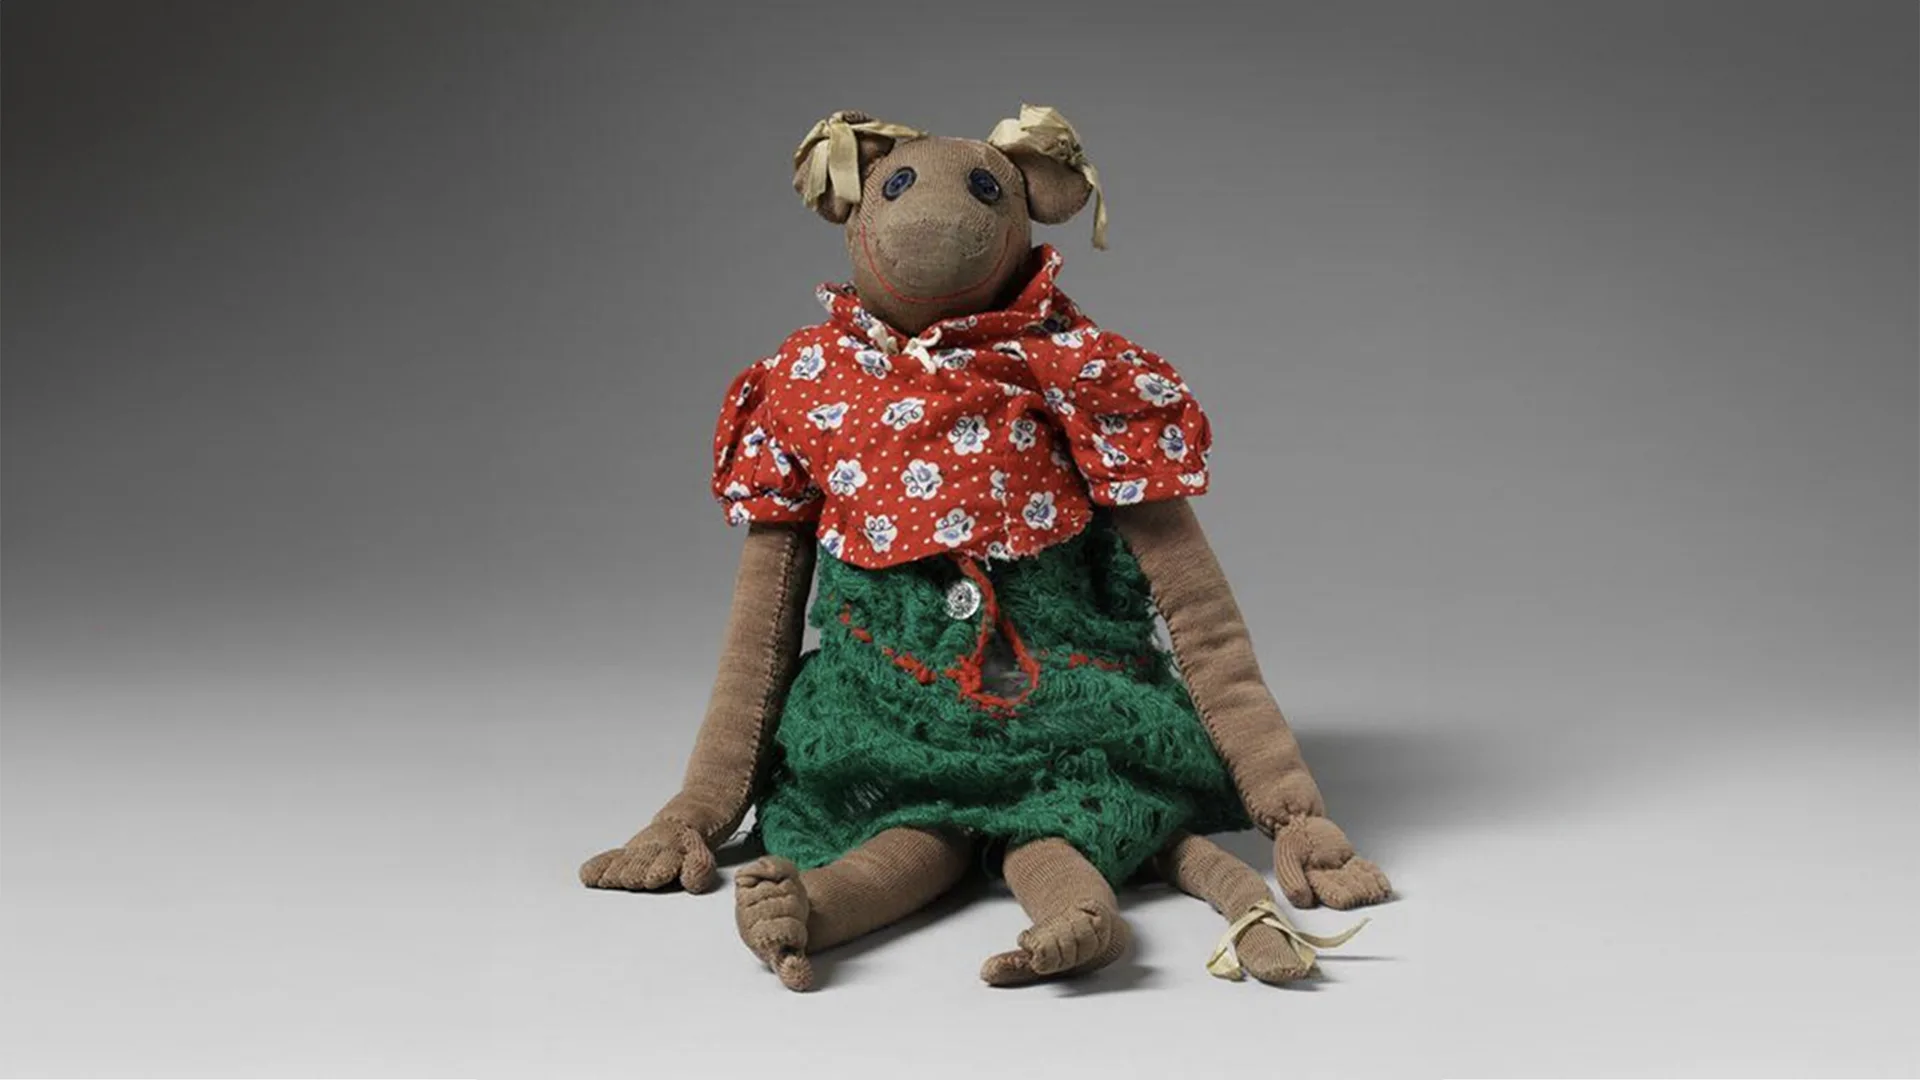 Andelusia, the monkey doll made from stockings